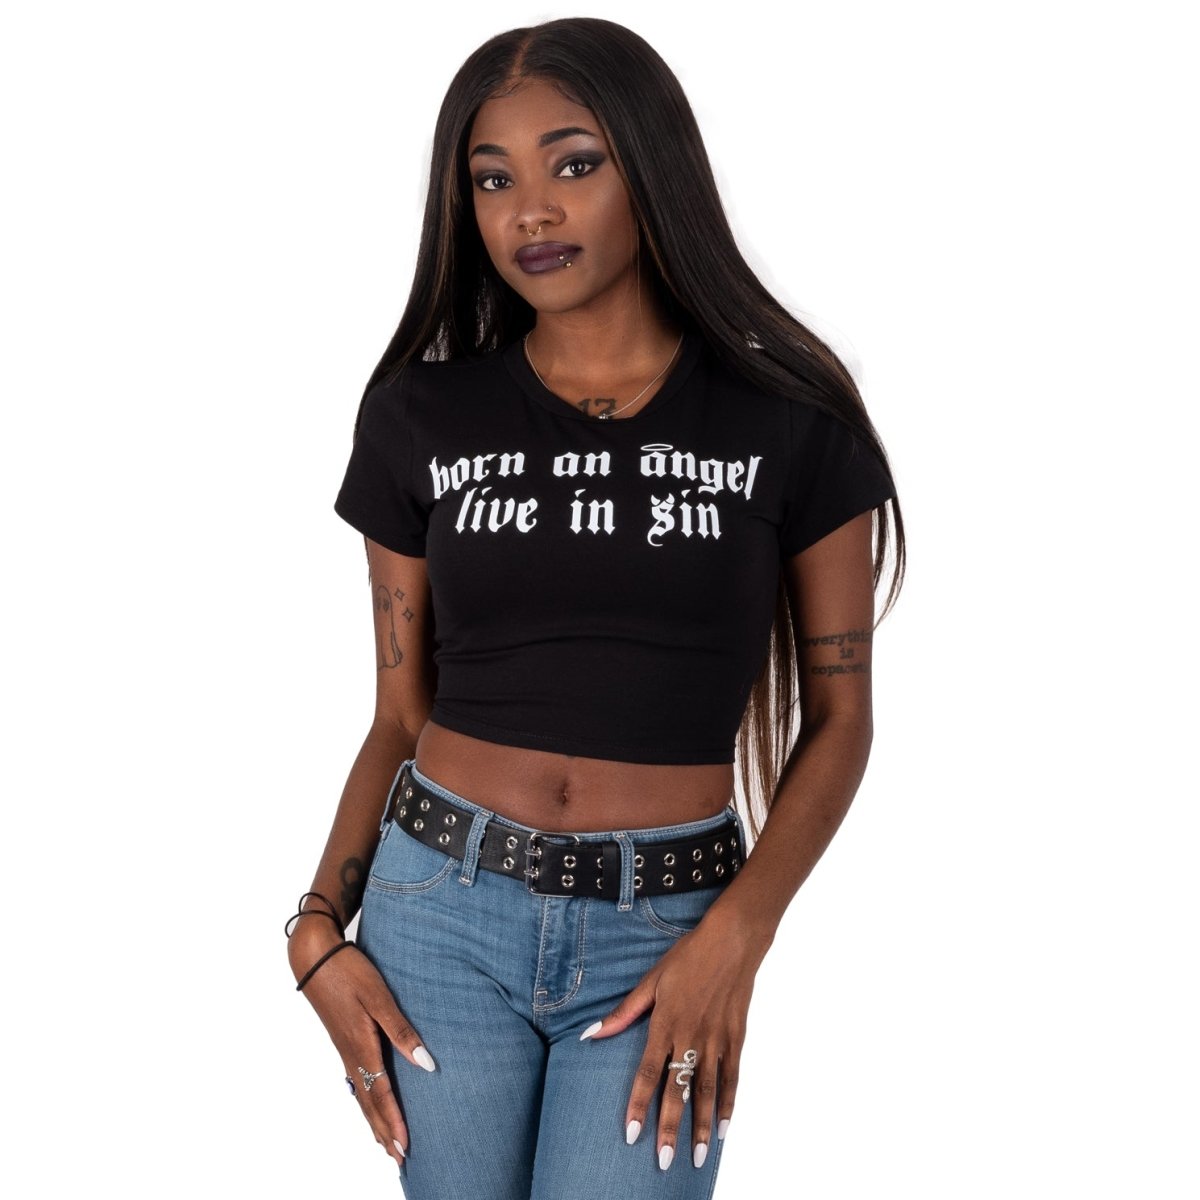 Too Fast | Born An Angel Live In Sin Cropped Baby Tee